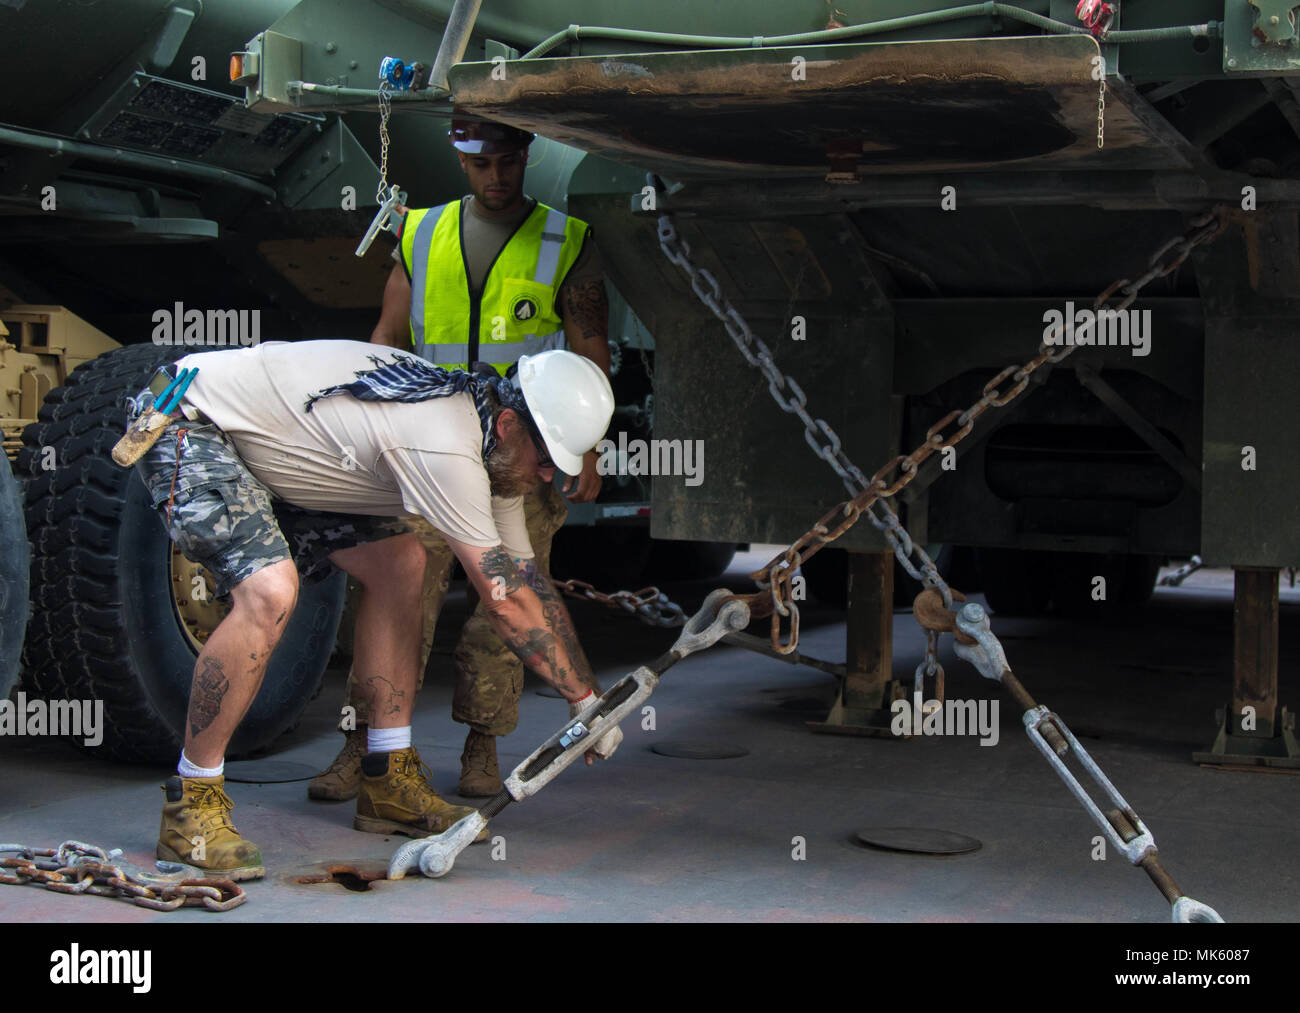 PORT OF SHUAIBA, Kuwait (Nov 1, 2017) - A civilian contractor and a soldier with the 840th Transportation Battalion loosens the supports on equipment stored on the weather deck of the USNS Bob Hope. USNS Bob Hope was carrying vehicles, large mechanical equipment, and other motorized tools to be used in the Central Command Area of Responsibility. (U.S. Army photo by Sgt. Jaccob Hearn) Stock Photo